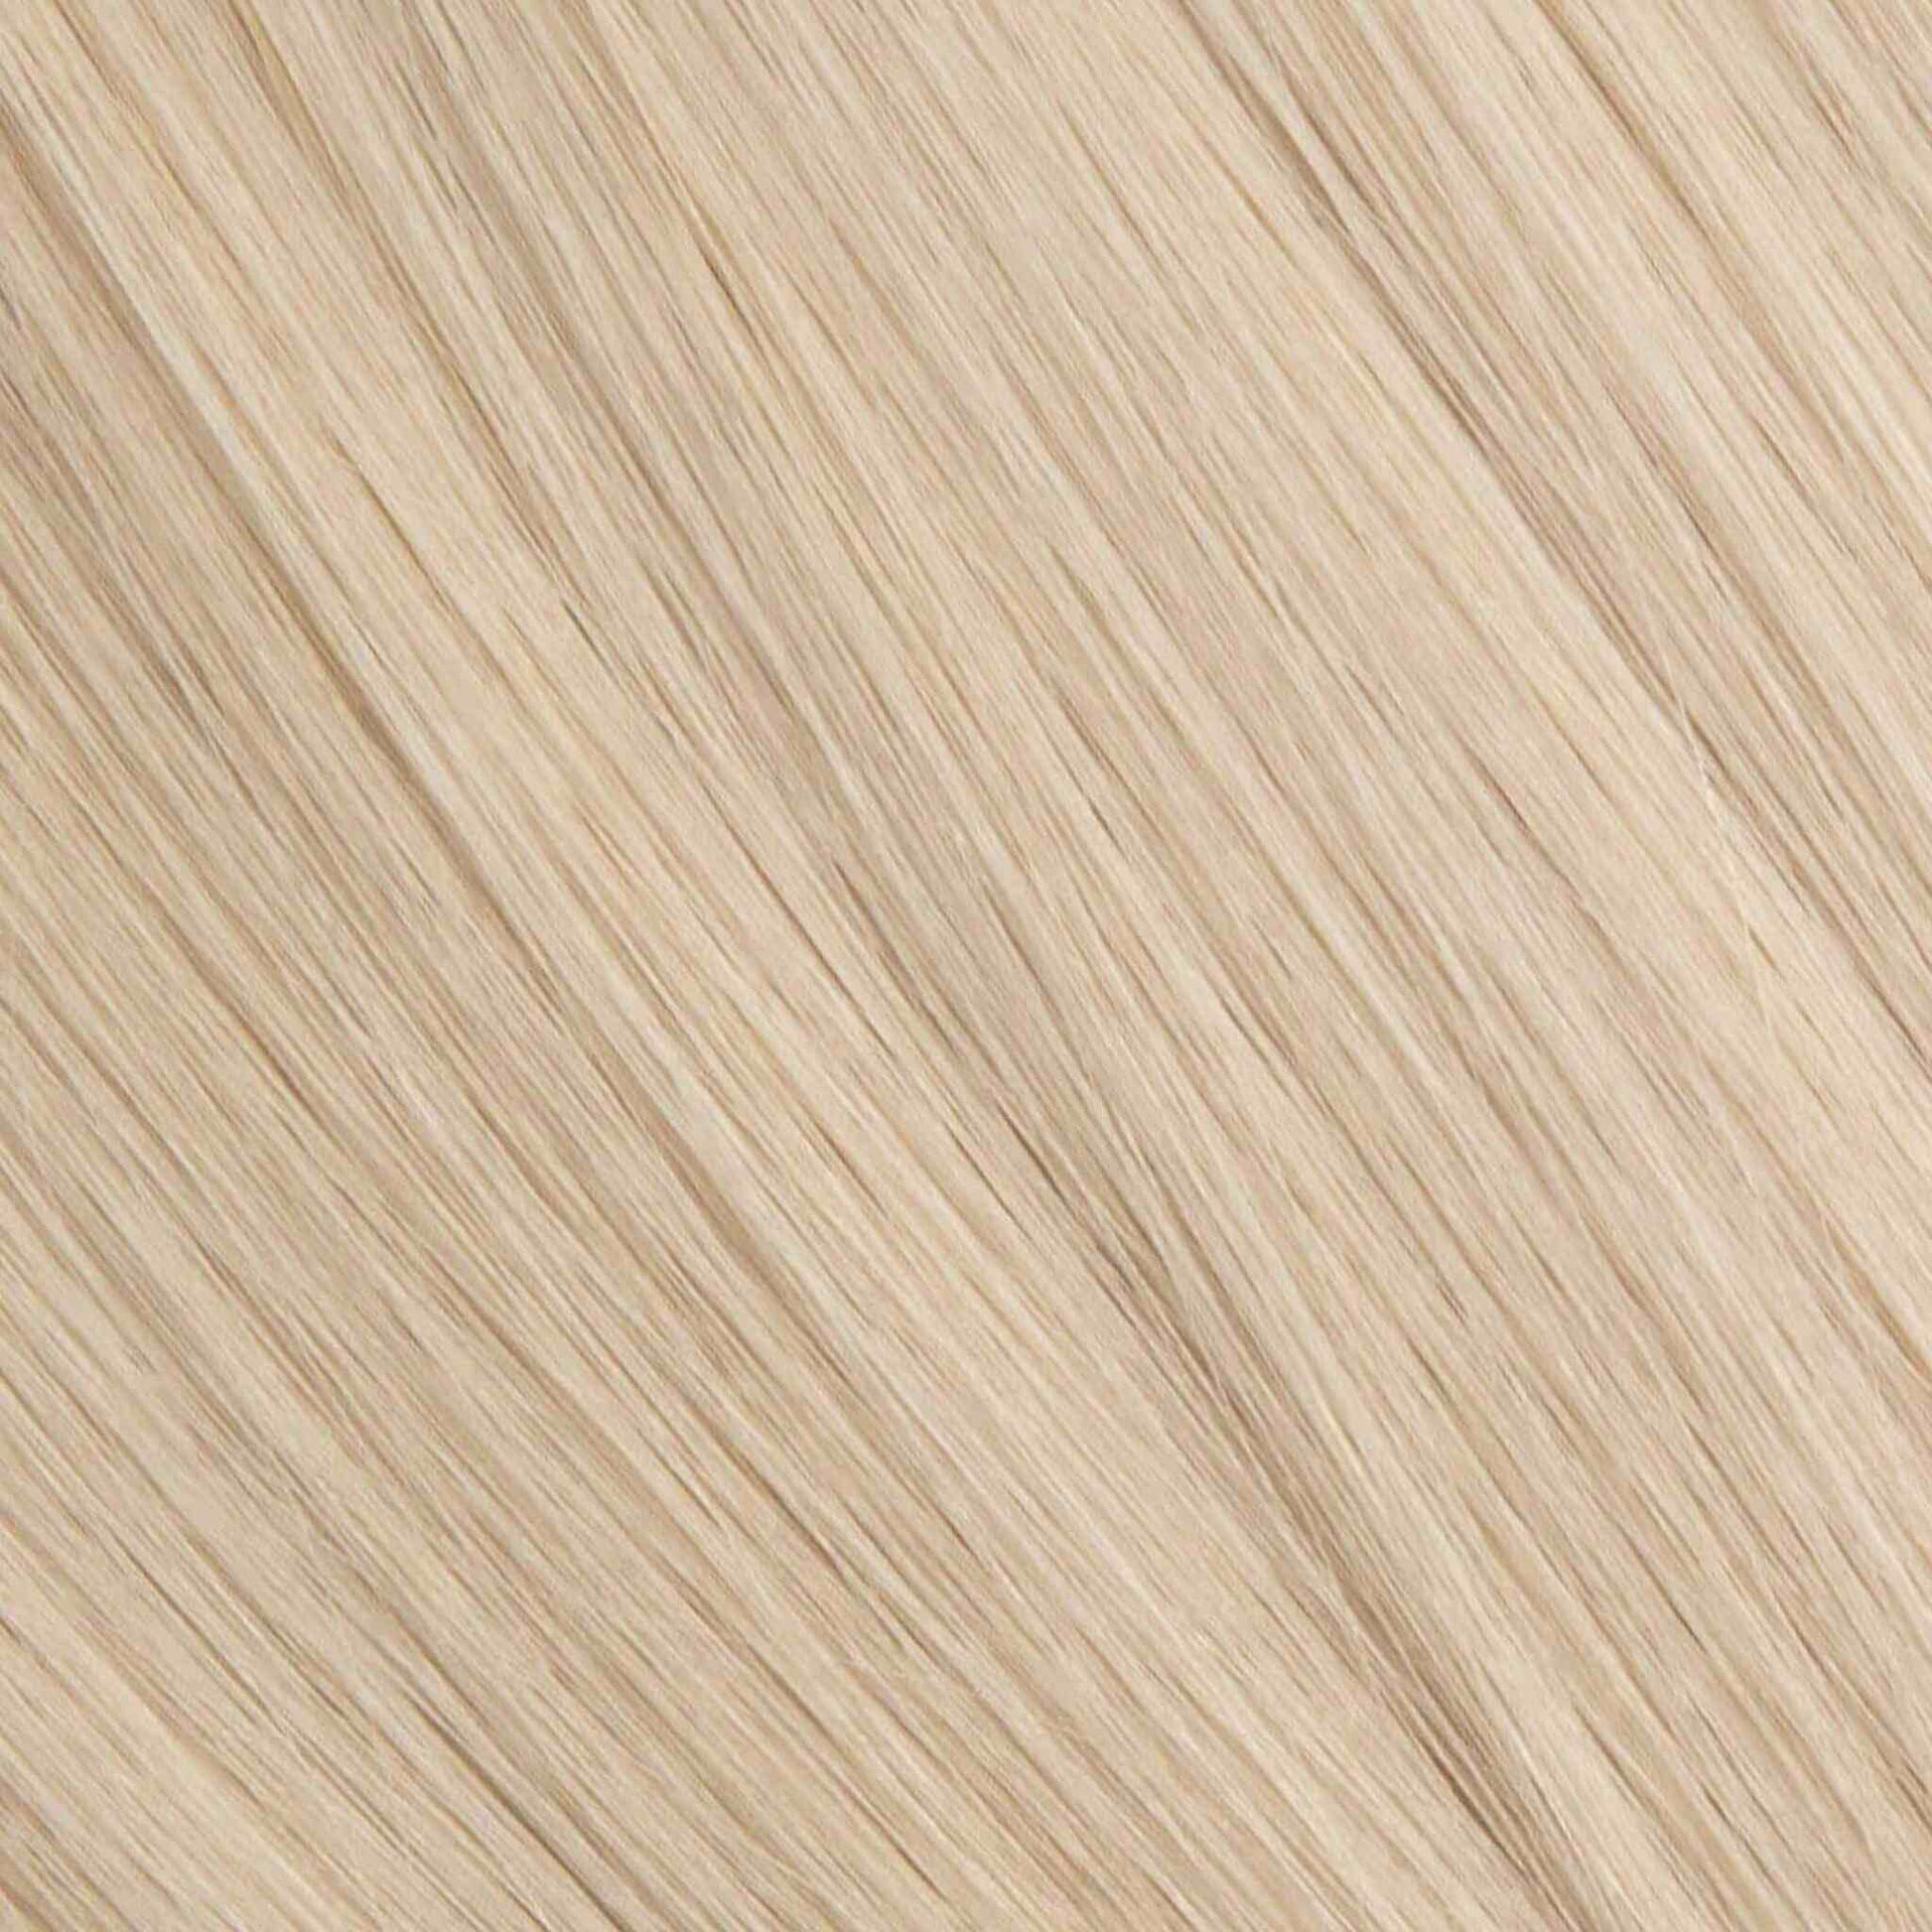 I-Tip 18" 25g Professional Hair Extensions - Icy Silver Blonde #66